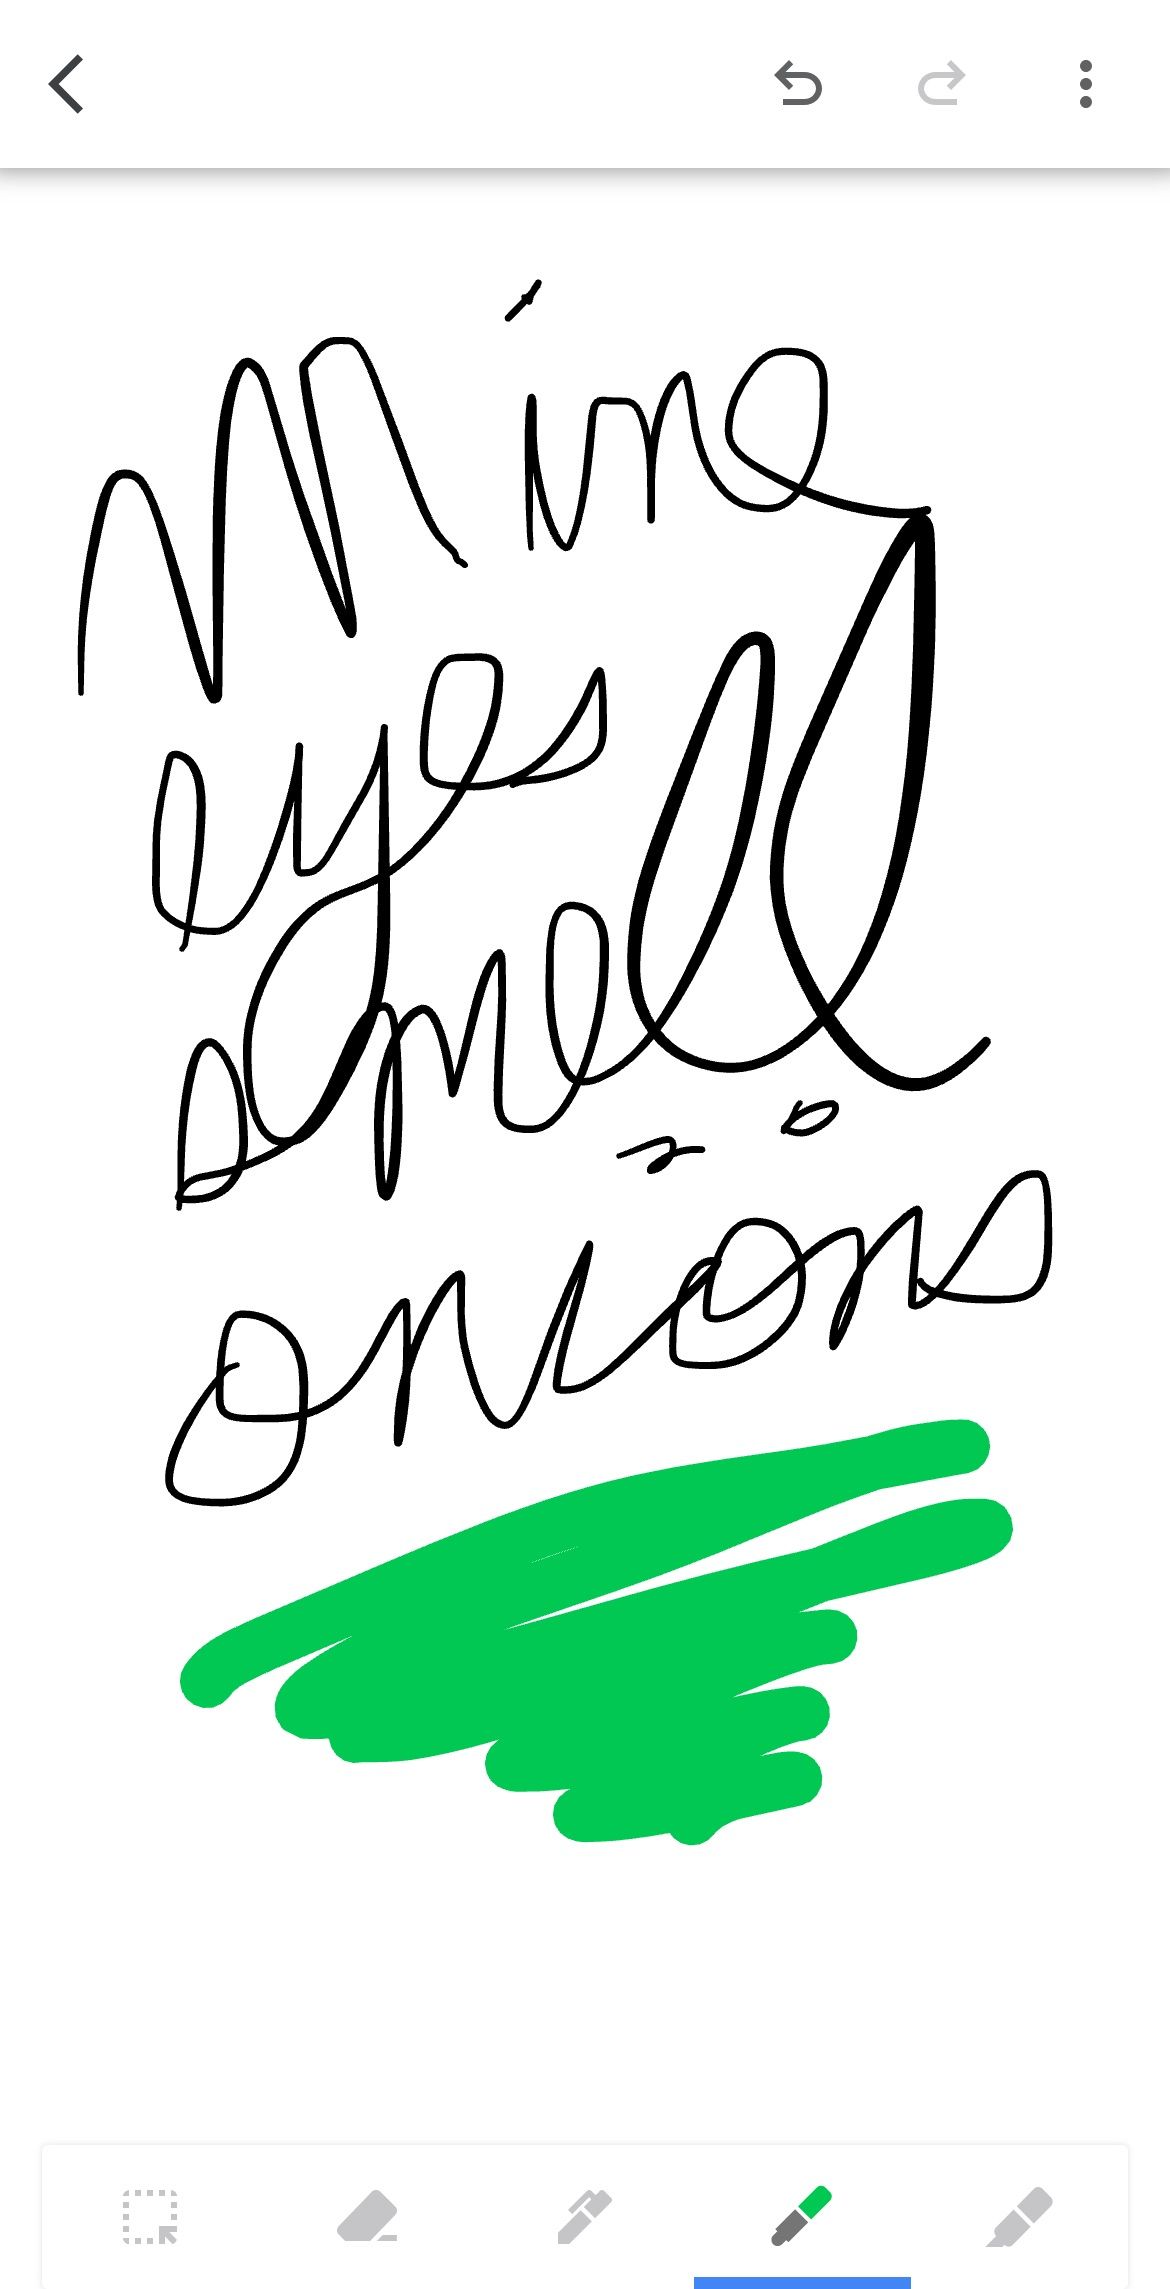 Google Keep drawing canvas with the words Mine eyes smell onions written in curcive and a green underline.